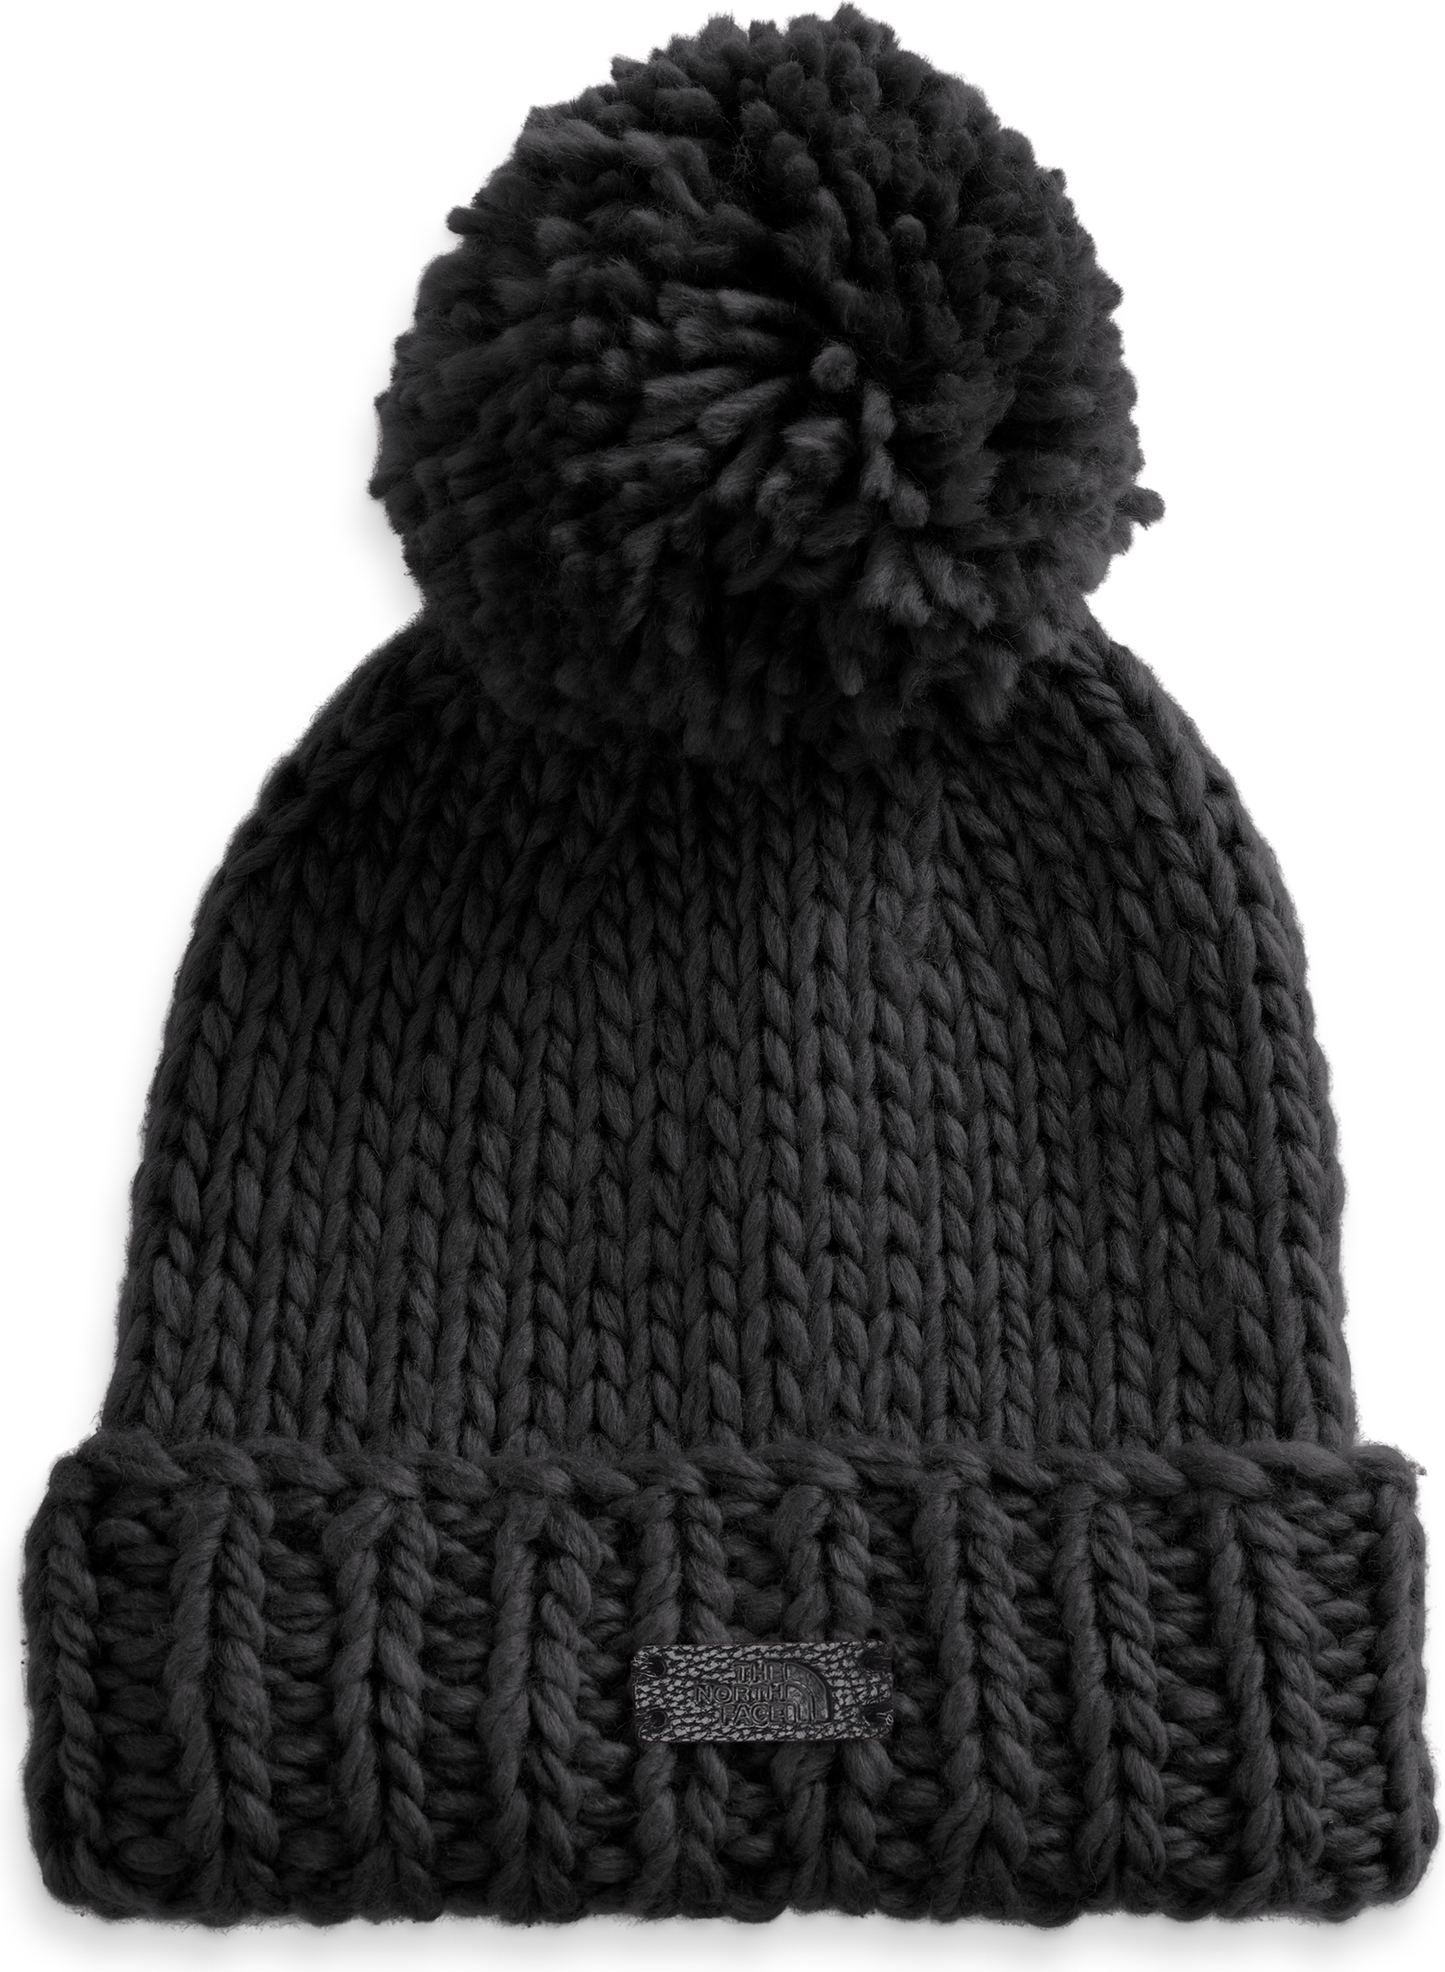 The North Face Accessories Women's City Coziest Beanie Tnf Black